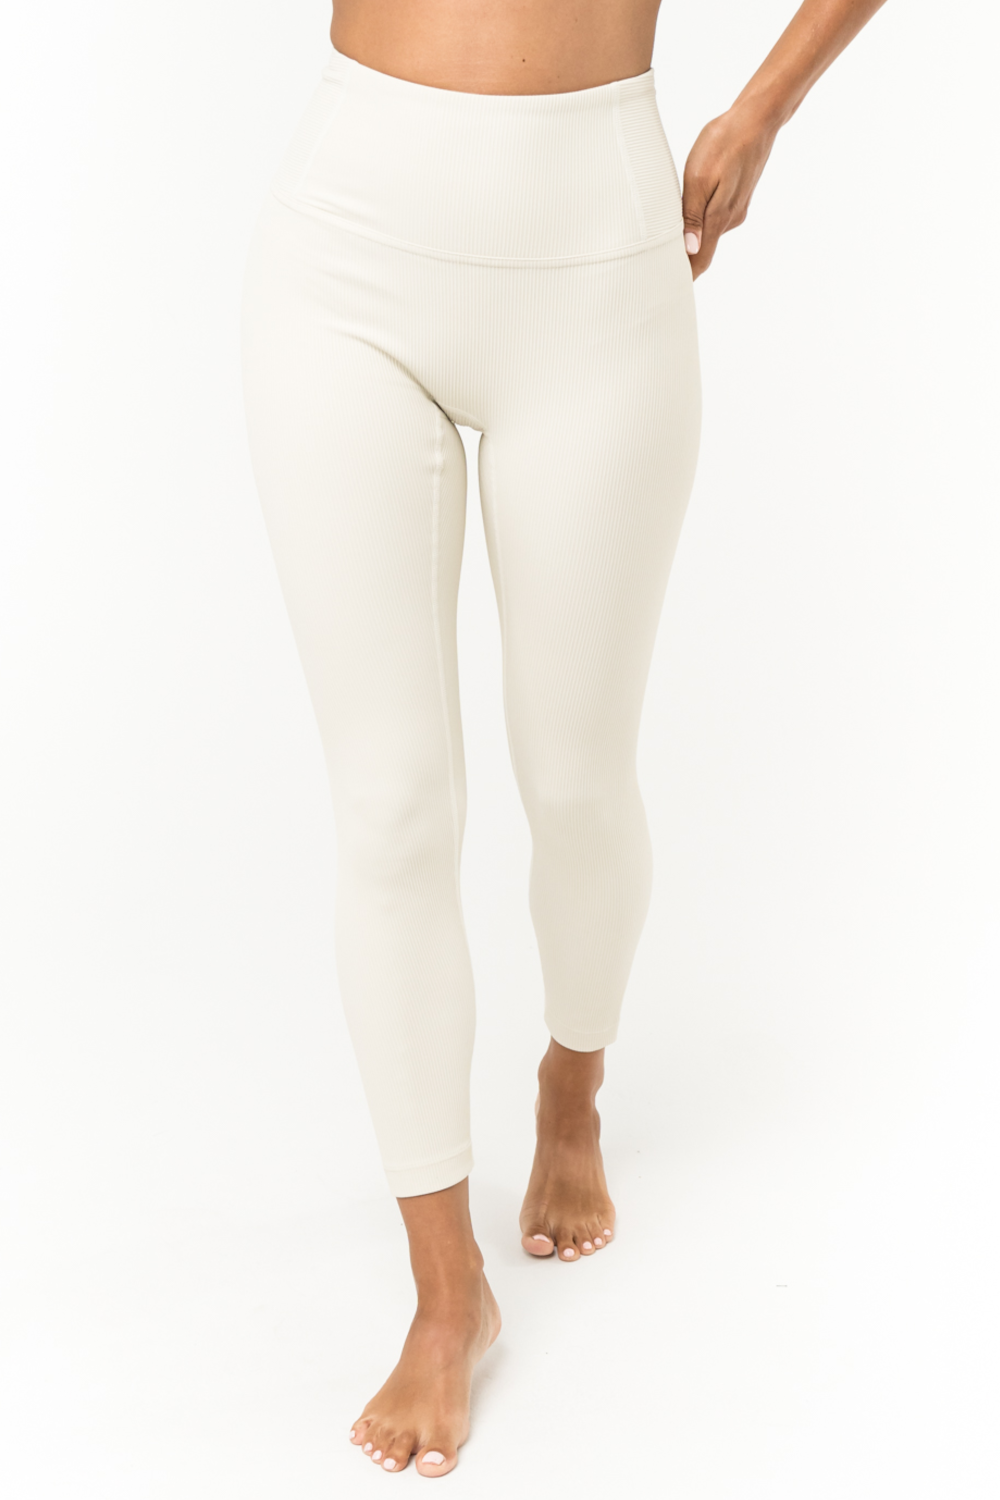 LovLei Leggings - Level Up (Ribbed) Ivory Solid / S